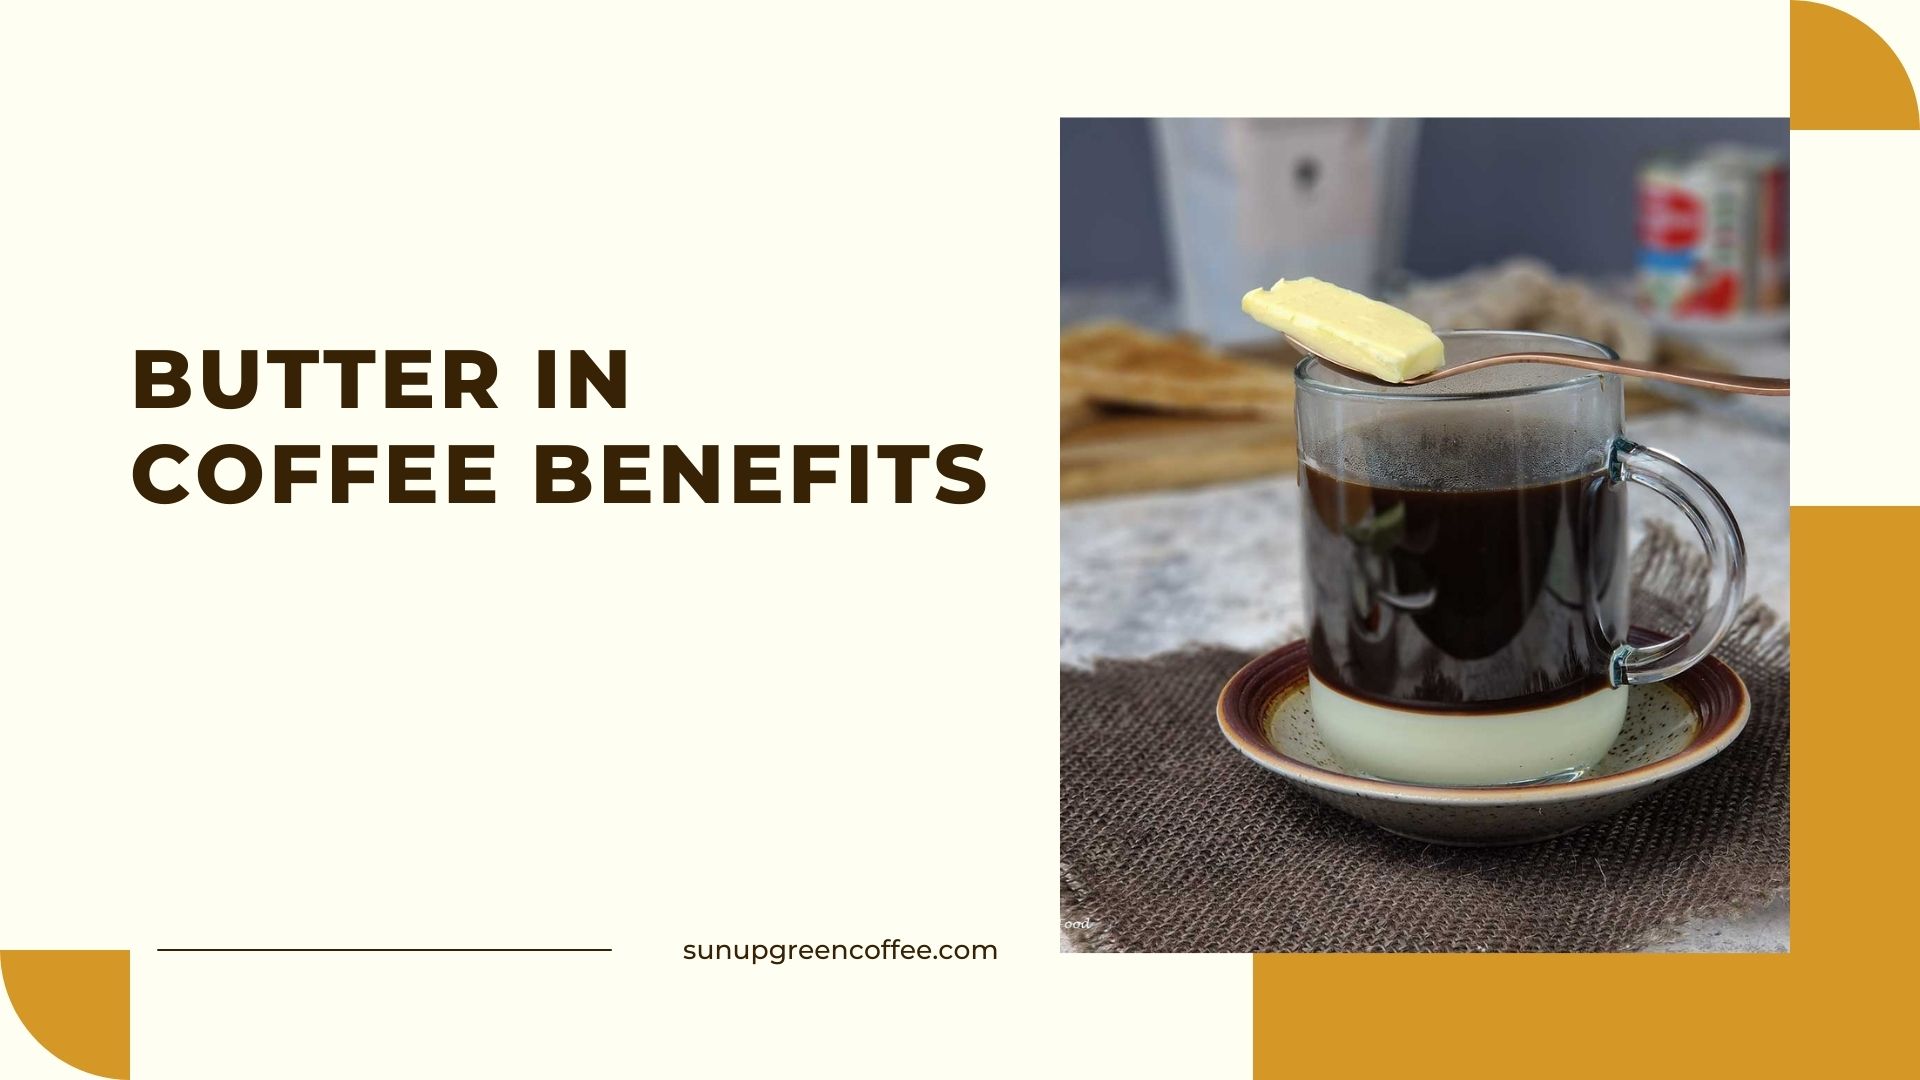 Butter in Coffee Benefits